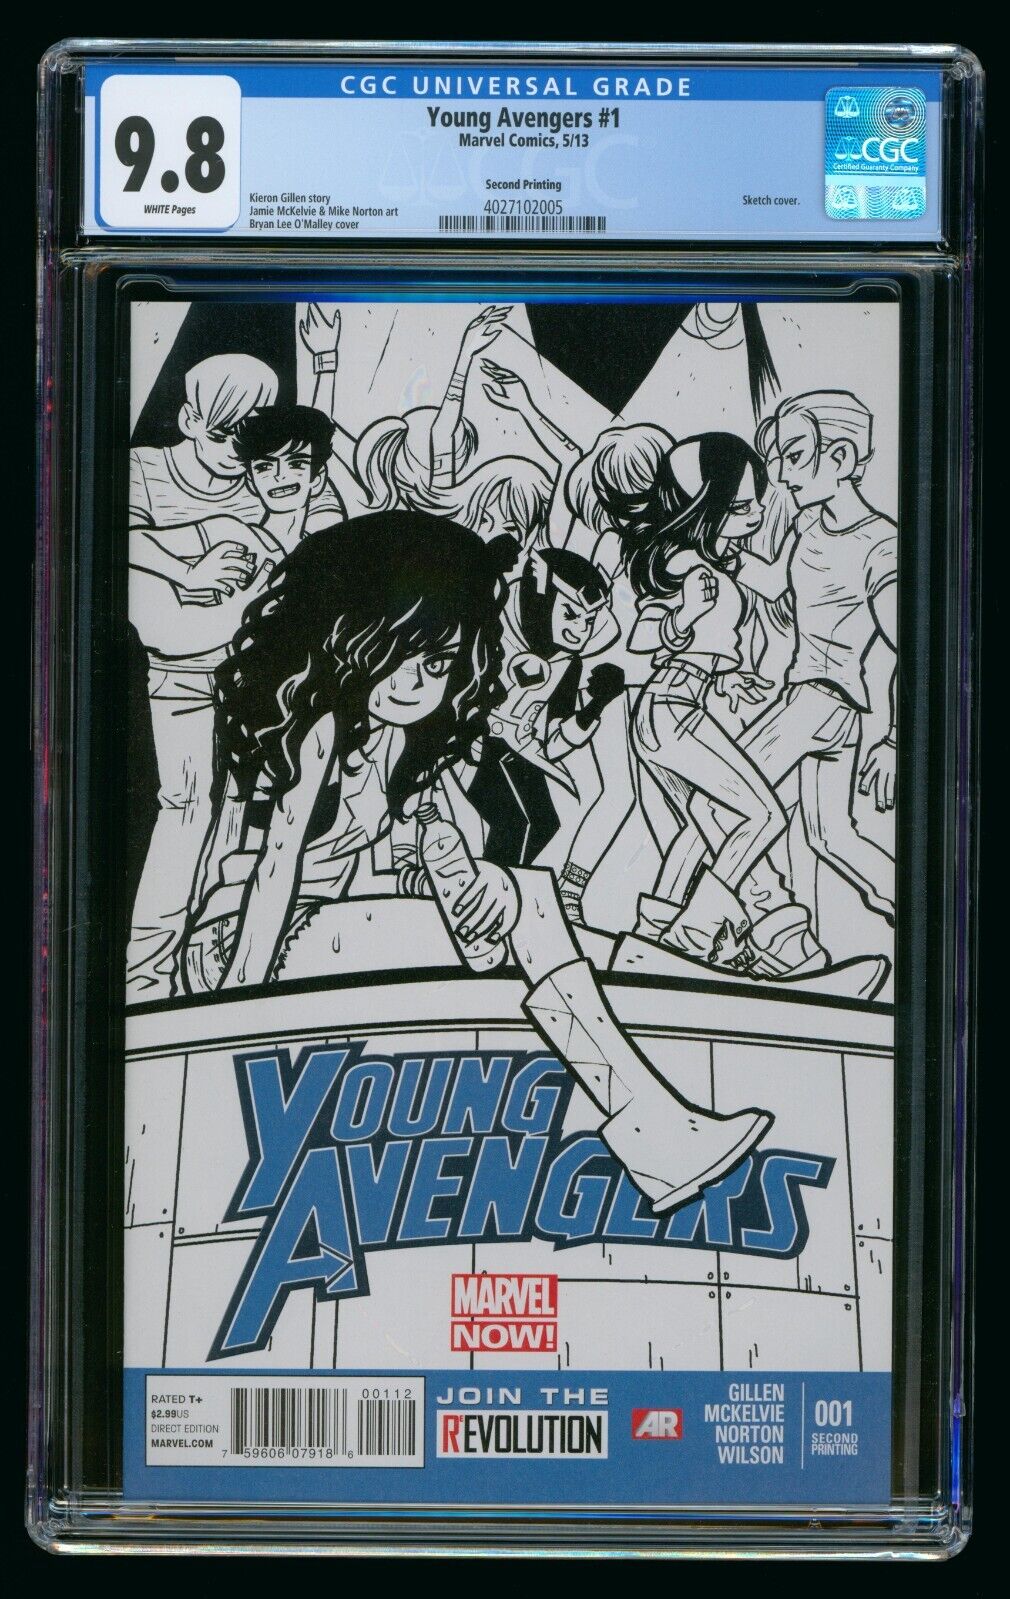 YOUNG AVENGERS #1 (2013) CGC 9.8 SKETCH COVER VARIANT 2nd PRINT